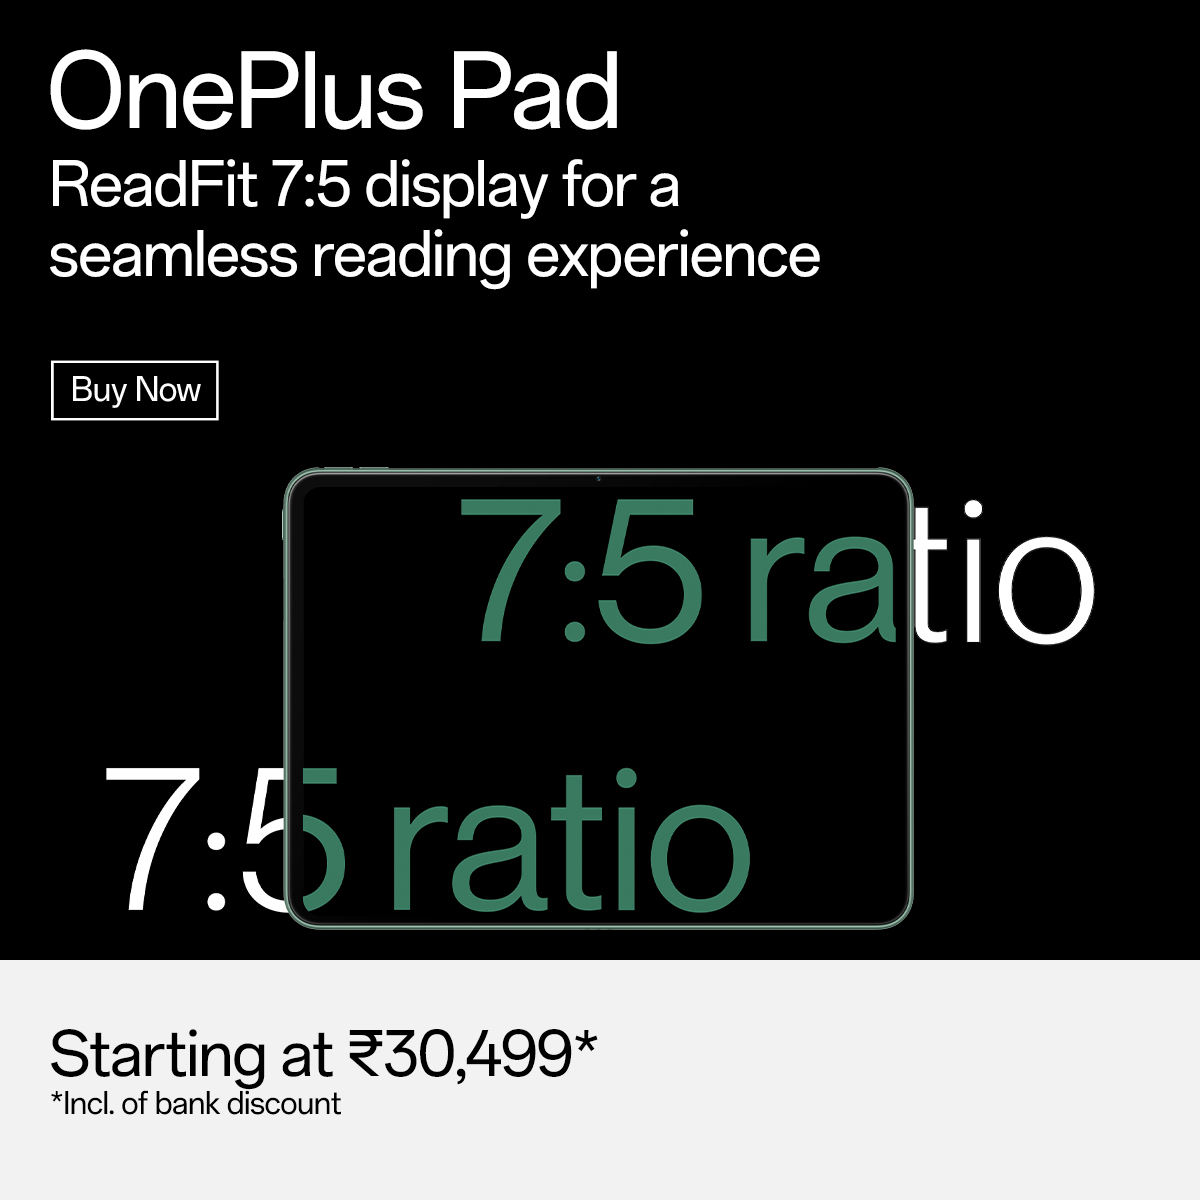 #OnePlusPad with ReadFit 7:5 Display... for the perfect binge-reading session.
Now starting at ₹30,499 on oneplus.in